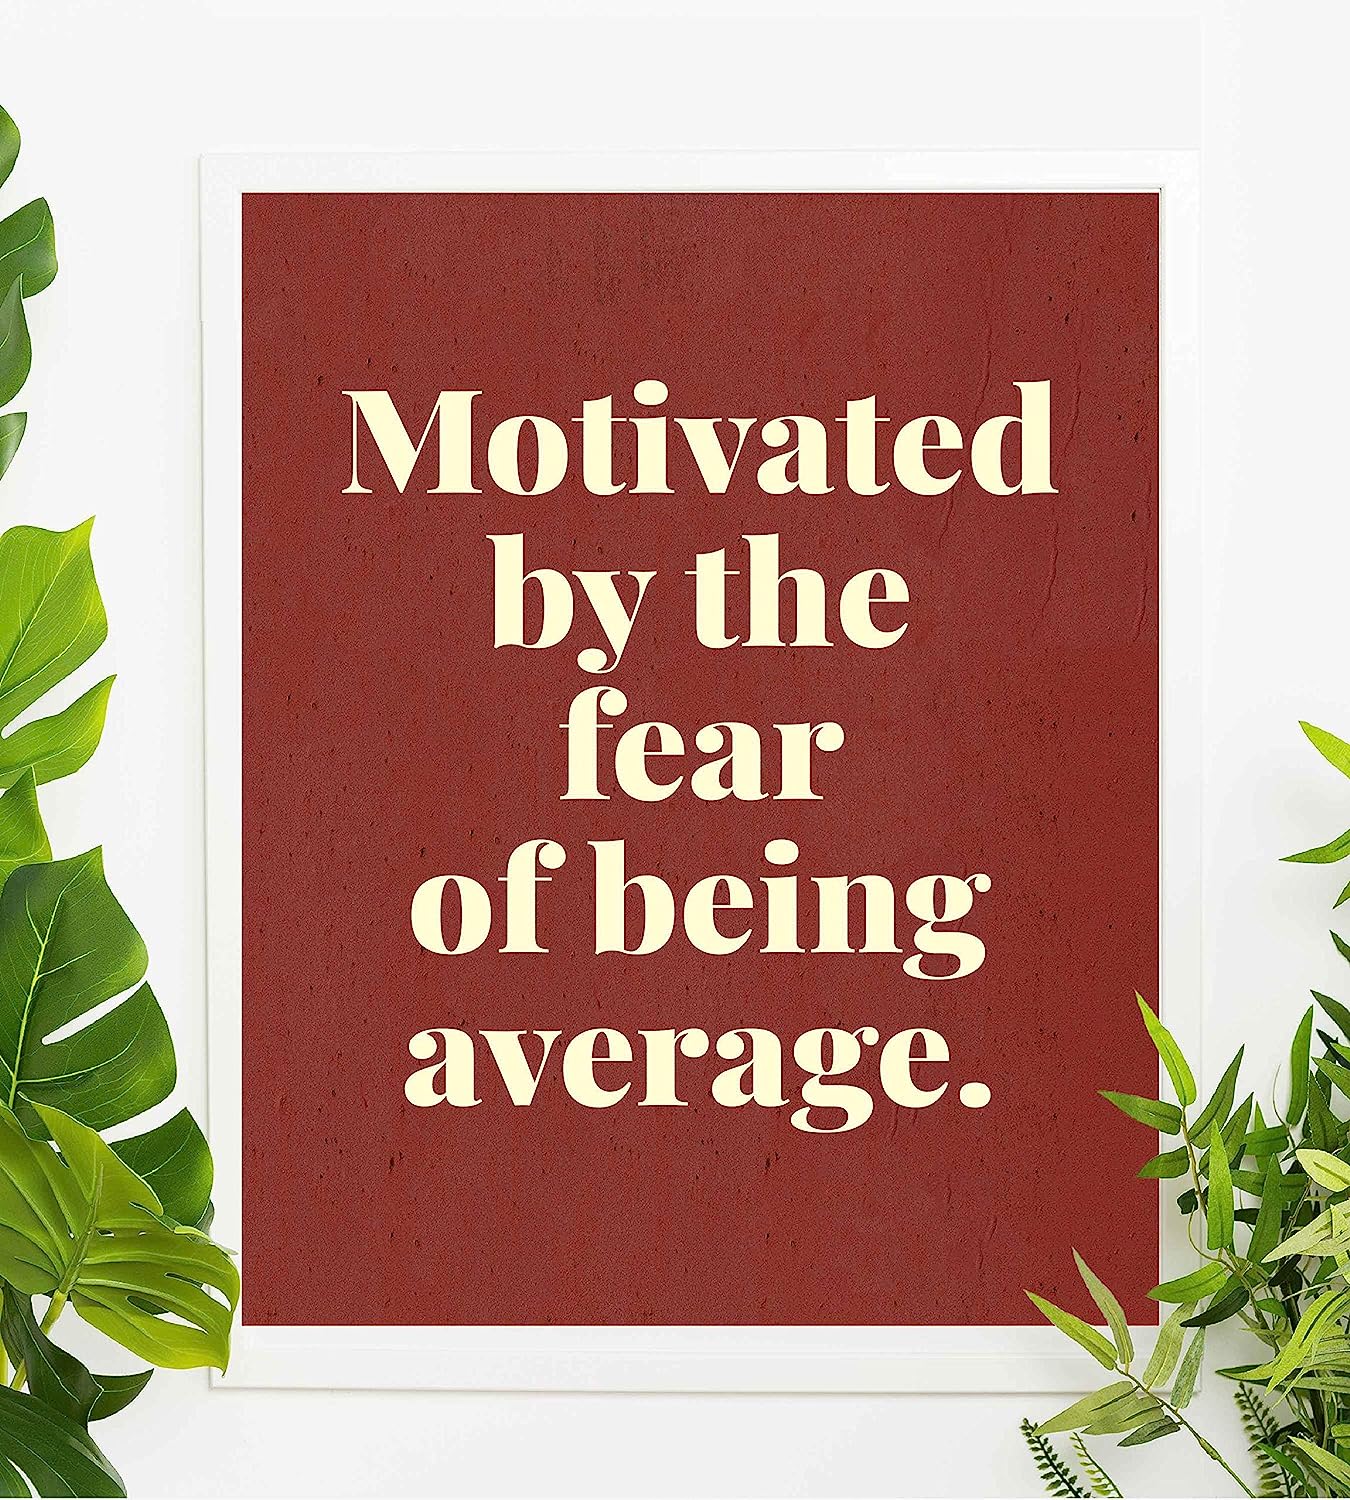 Motivated by the Fear of Being Average- Motivational Quotes Wall Art- 8 x 10" Typographic Poster Print-Ready to Frame. Ideal for Home-Office-School-Gym-Locker Room D?cor. Inspire Your Team!